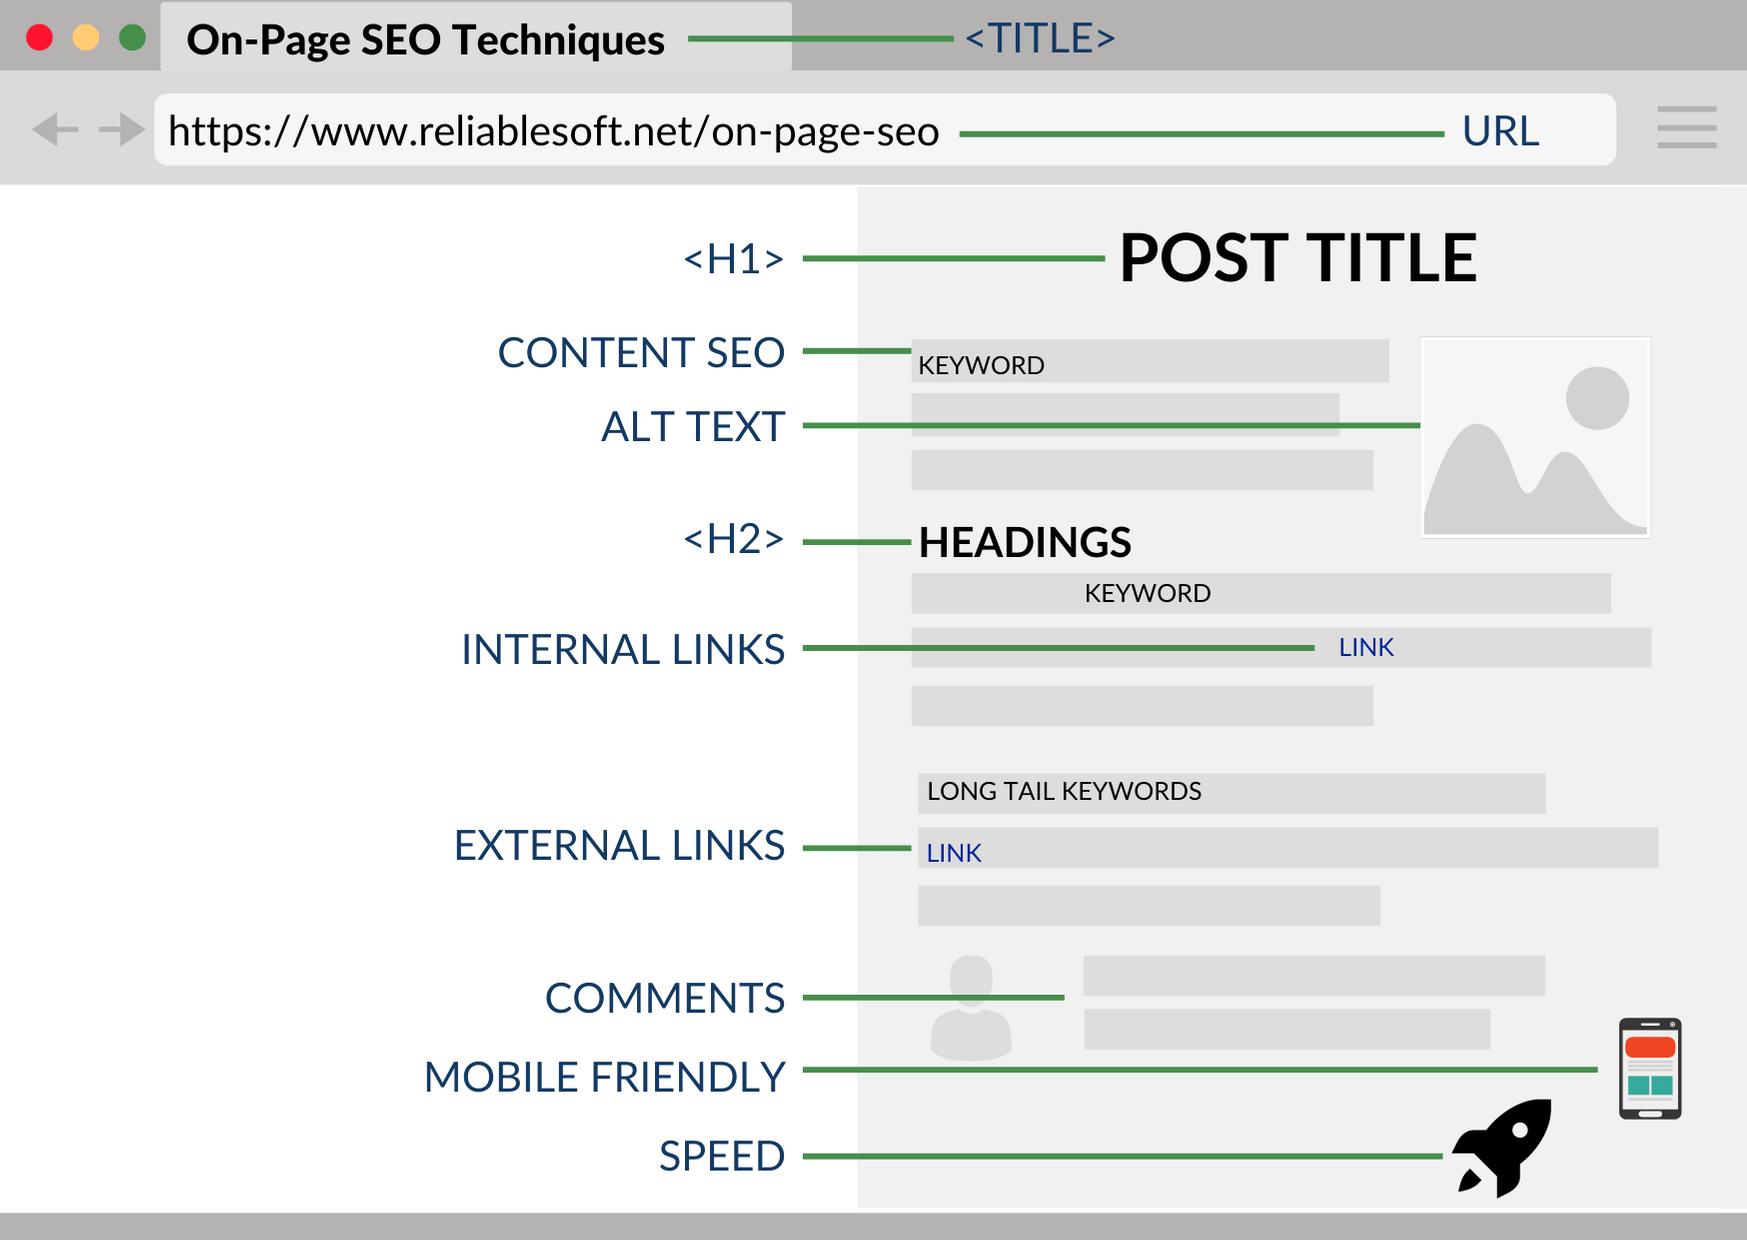 Importance of Long Tail Keywords & Automation in SEM